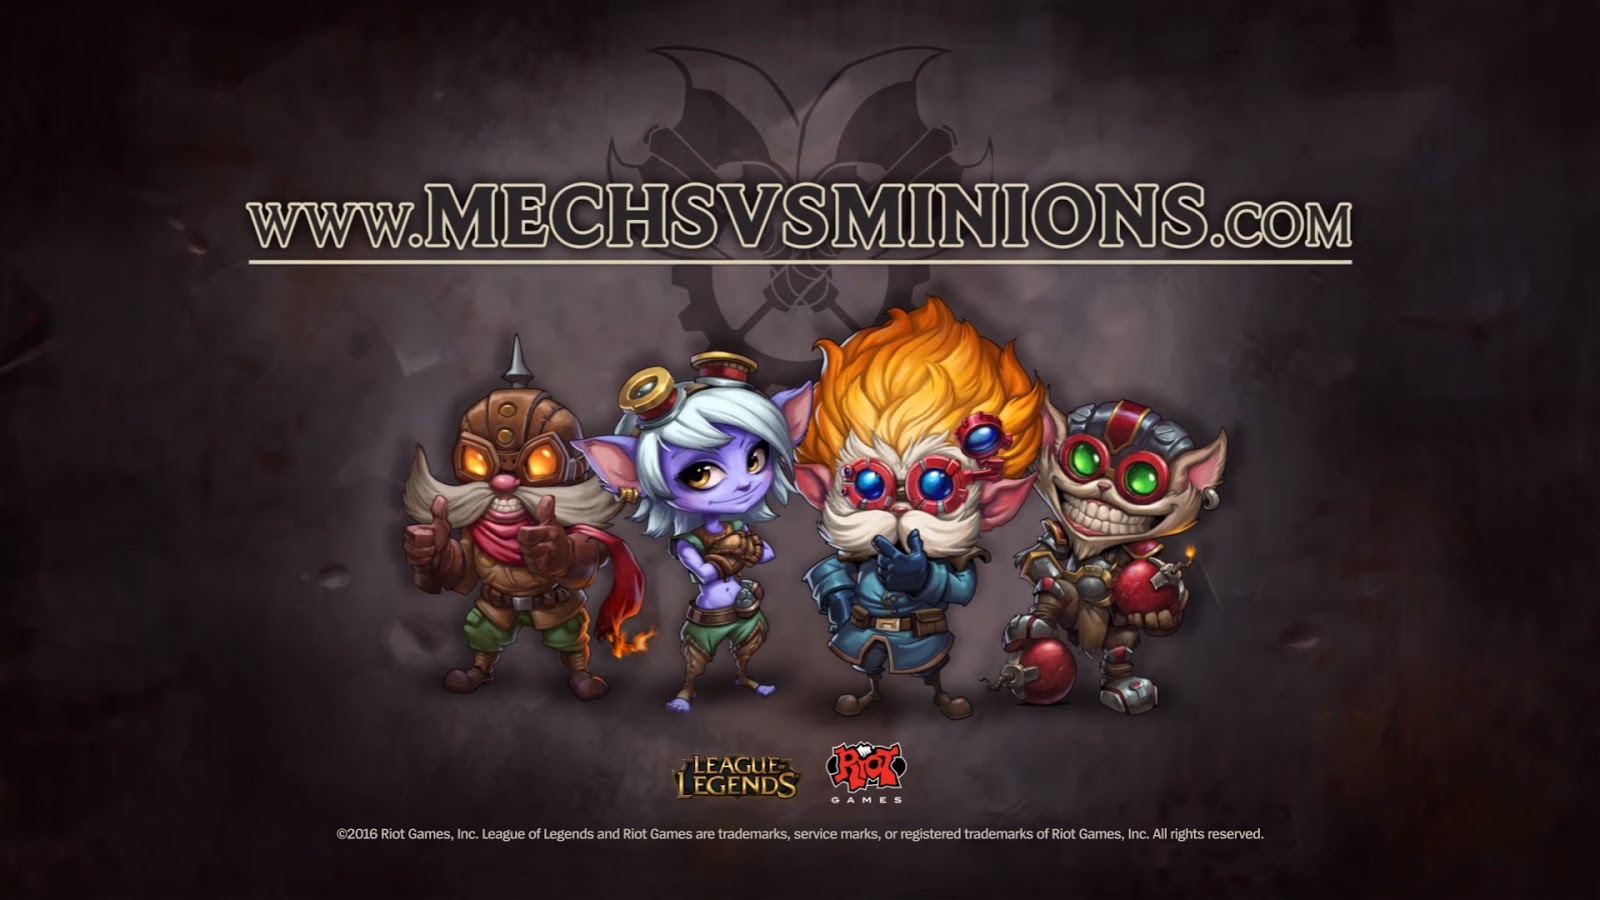 Surrender at 20: Mechs vs Minions - Cooperative Tabletop game in LoL Universe1600 x 900